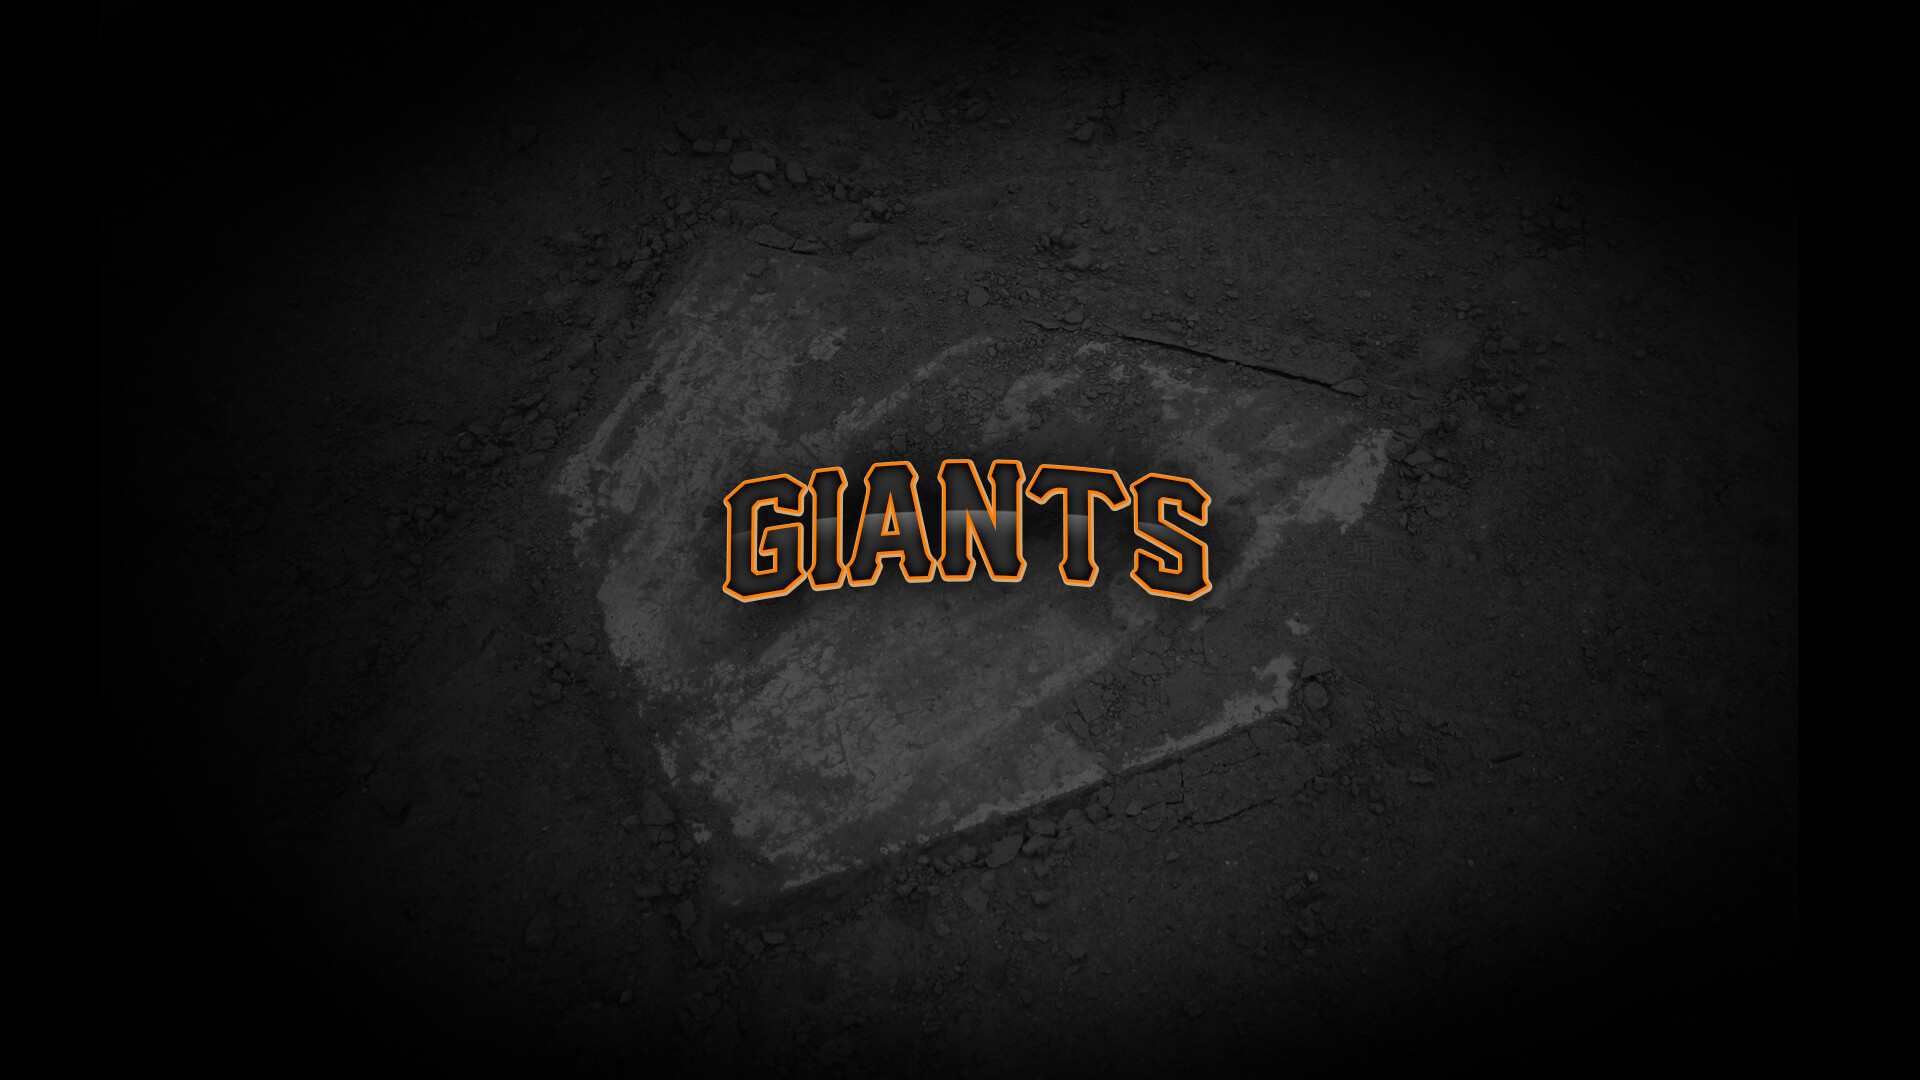 San Francisco Giants: The 1951 home run by Bobby Thomson known as the "Shot Heard 'Round the World". 1920x1080 Full HD Background.